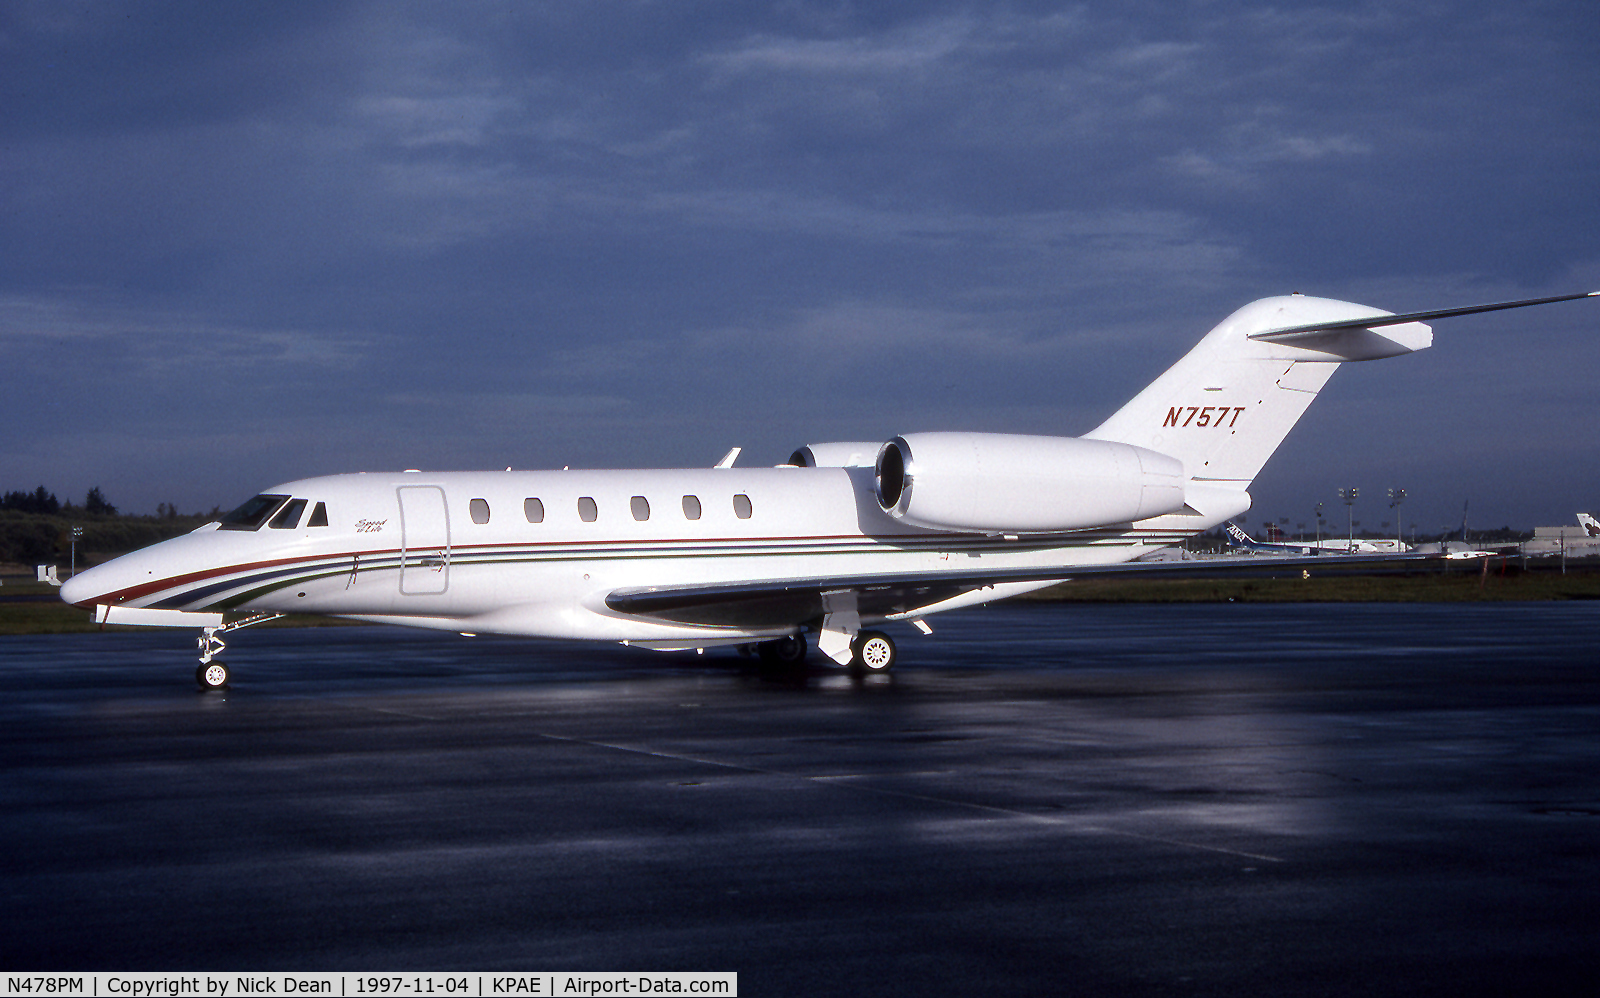 N478PM, 1997 Cessna 750 Citation X Citation X C/N 750-0014, KPAE (Target stores first Slicer N757T is currently registered N478PM as posted)